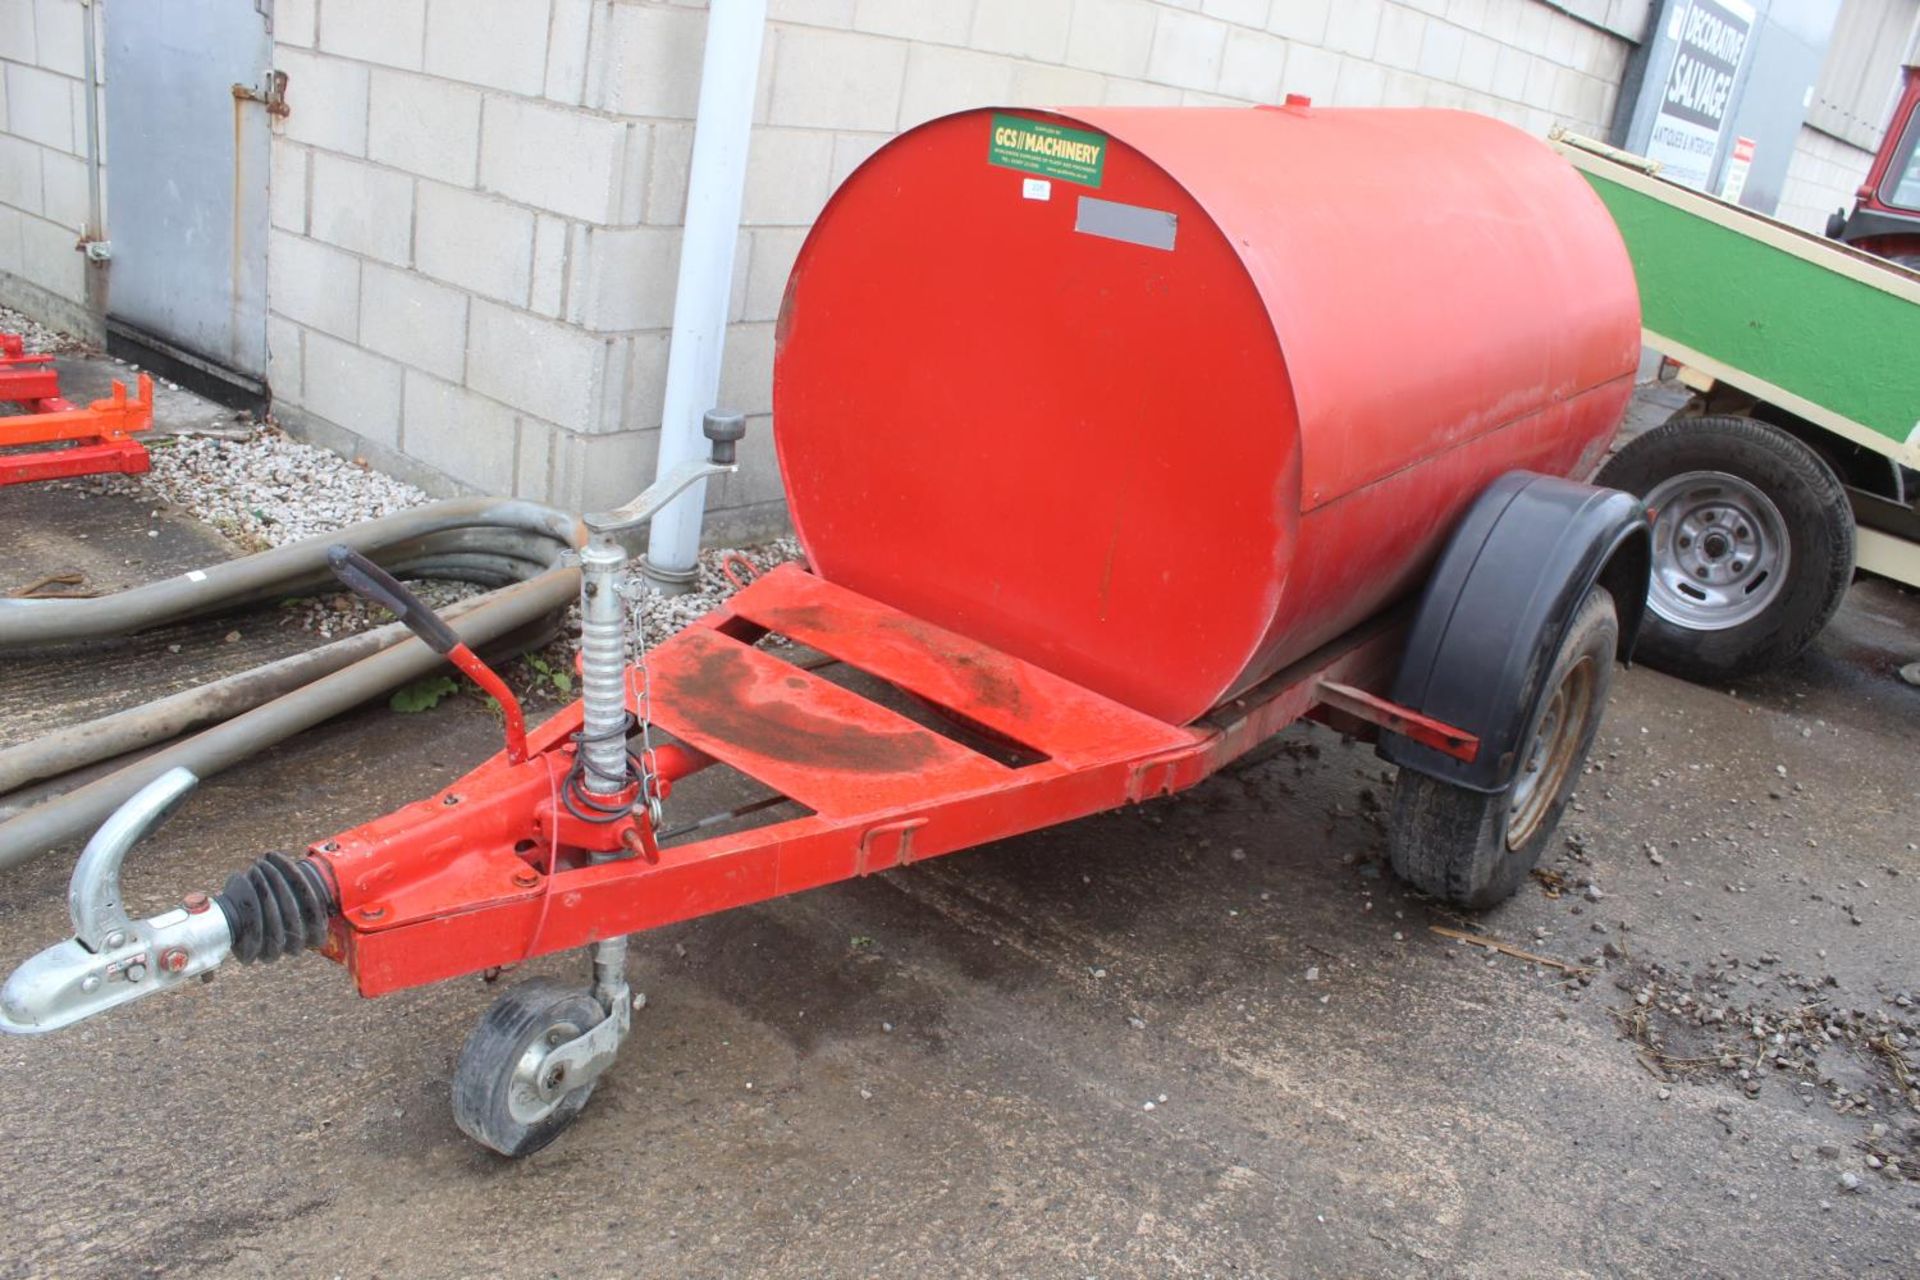 A TRAILER FUEL BOWSER COMPLETE WITH TRANSFER PUMP BELIEVED IN GOOD WORKING ORDER BUT NO WARRANTY